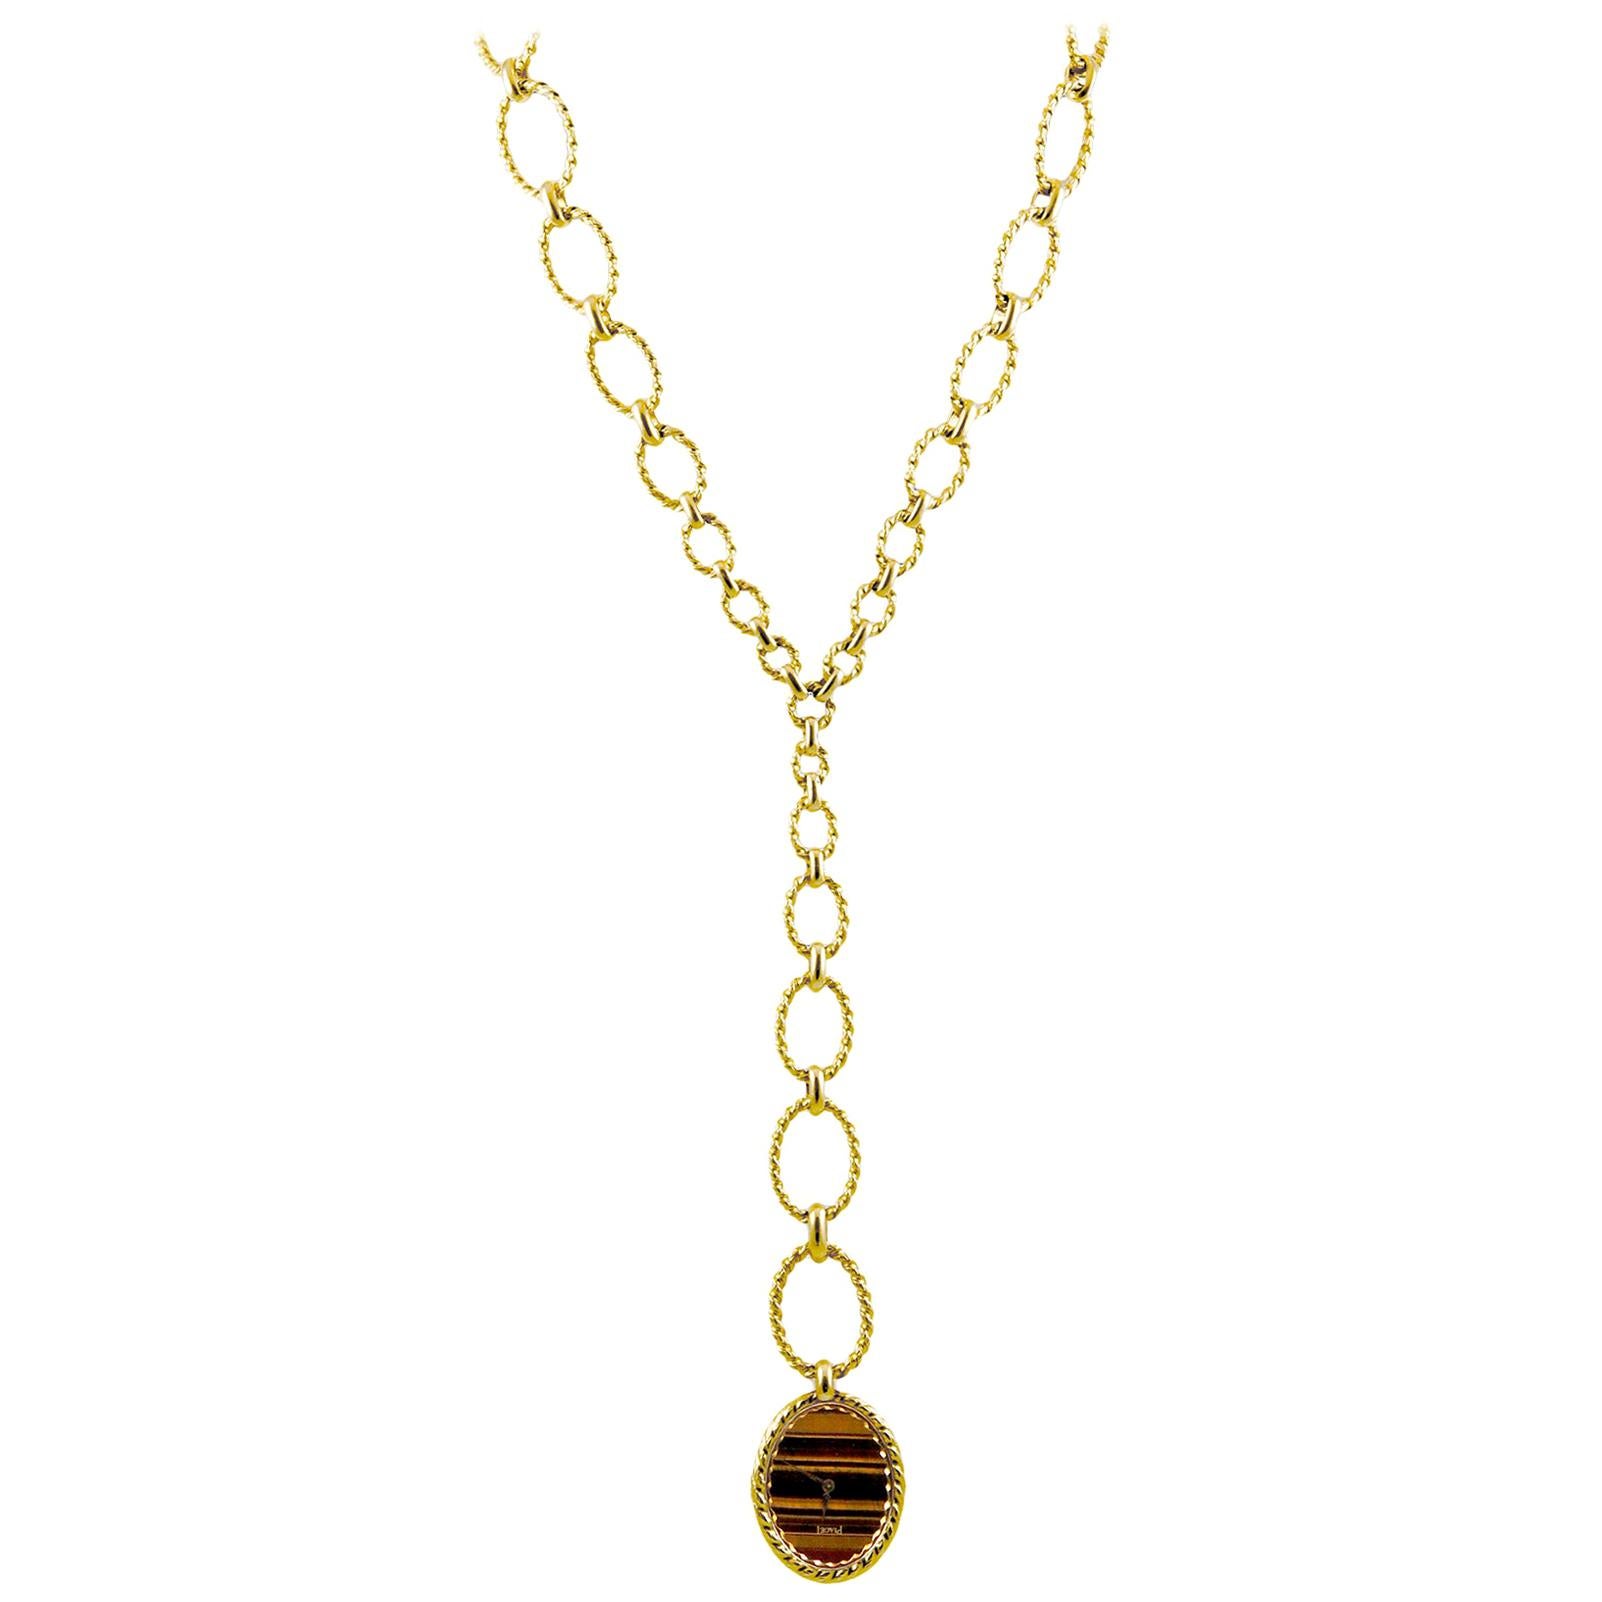 Piaget Tigers Eye Yellow Gold Sautoir Link Necklace Watch